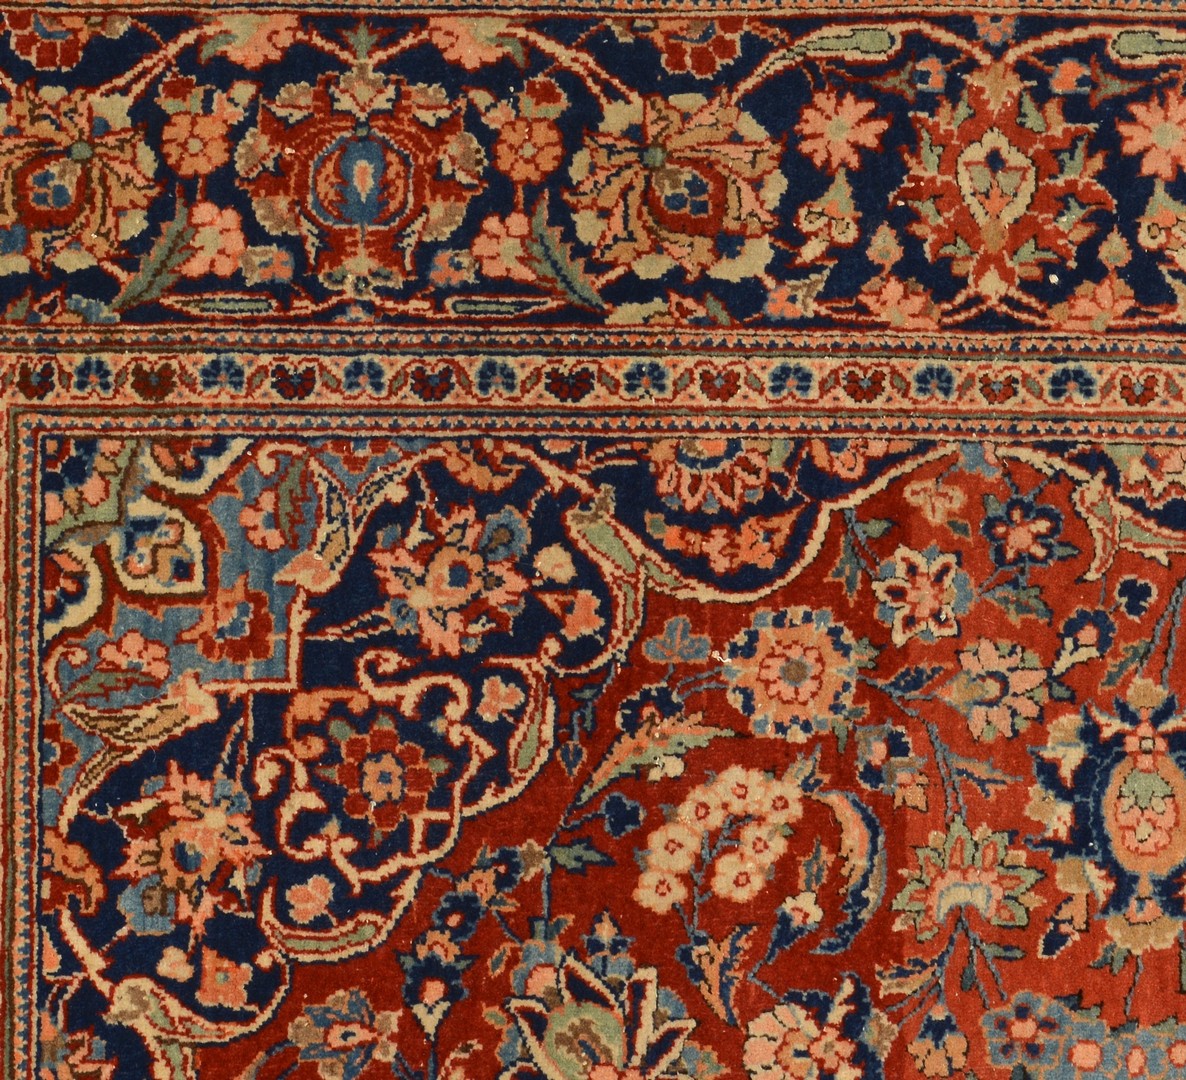 Lot 250: Persian Kashan area rug, early 20th c.